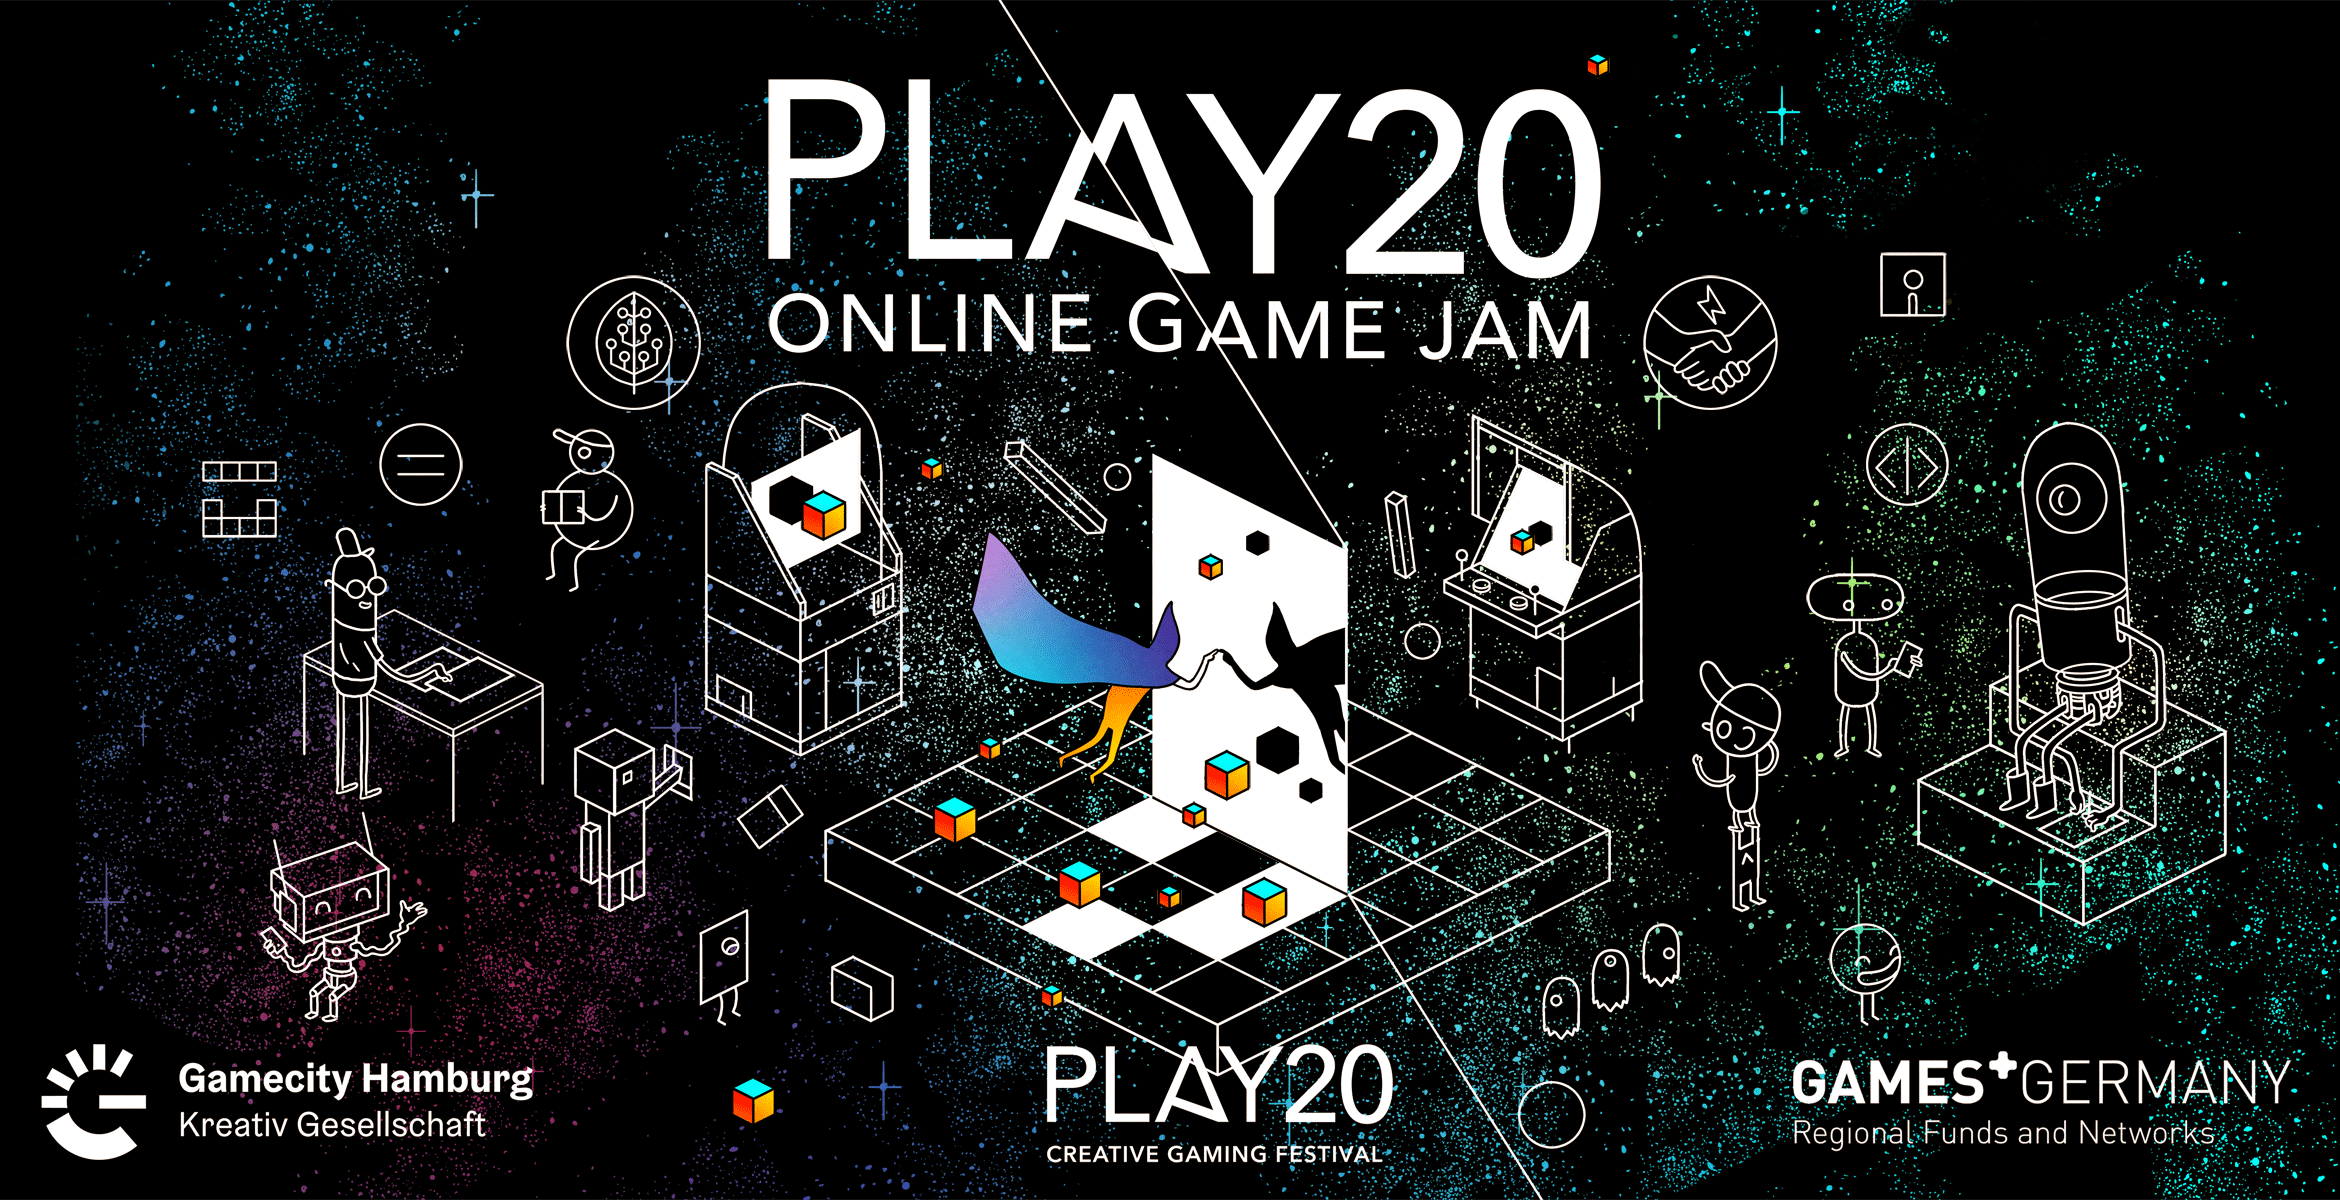 PLAY20 Online Game Jam 